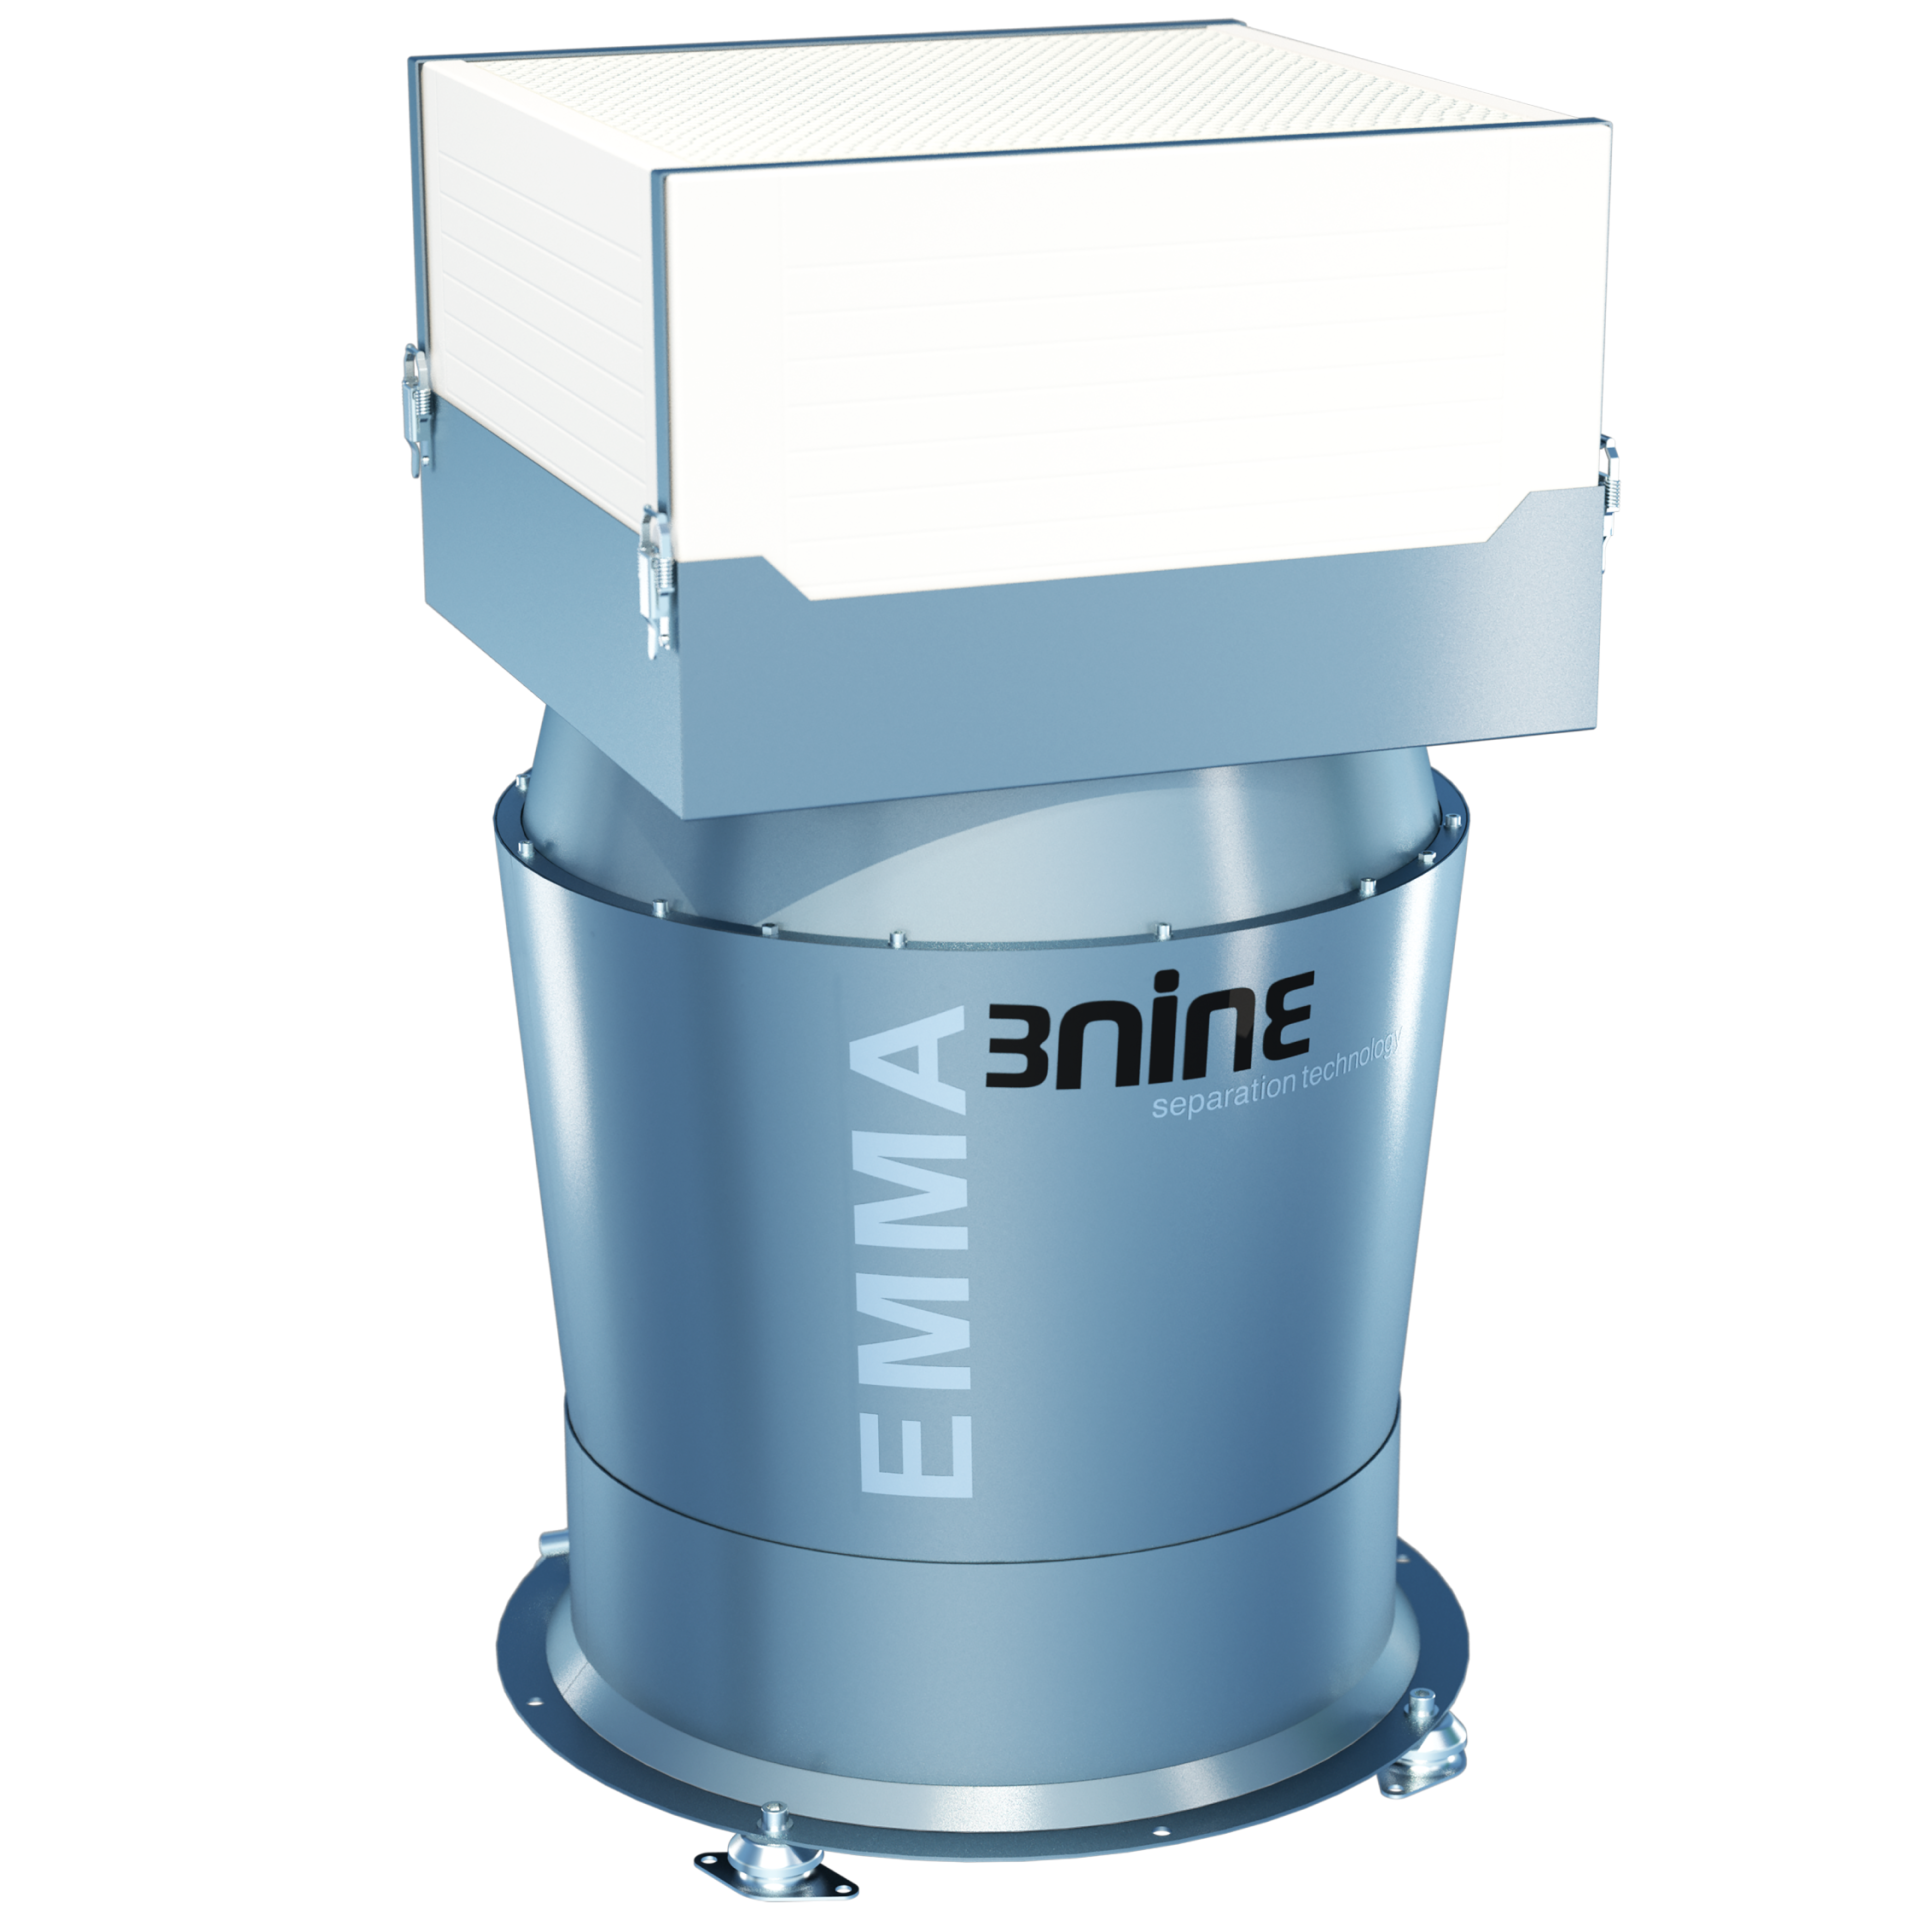 The oil mist eliminator Emma is the big sister in the 3nine BLUE LINE Series and was designed specifically for applications where a high air flow is essential, such as very large cabin or open machine tools.